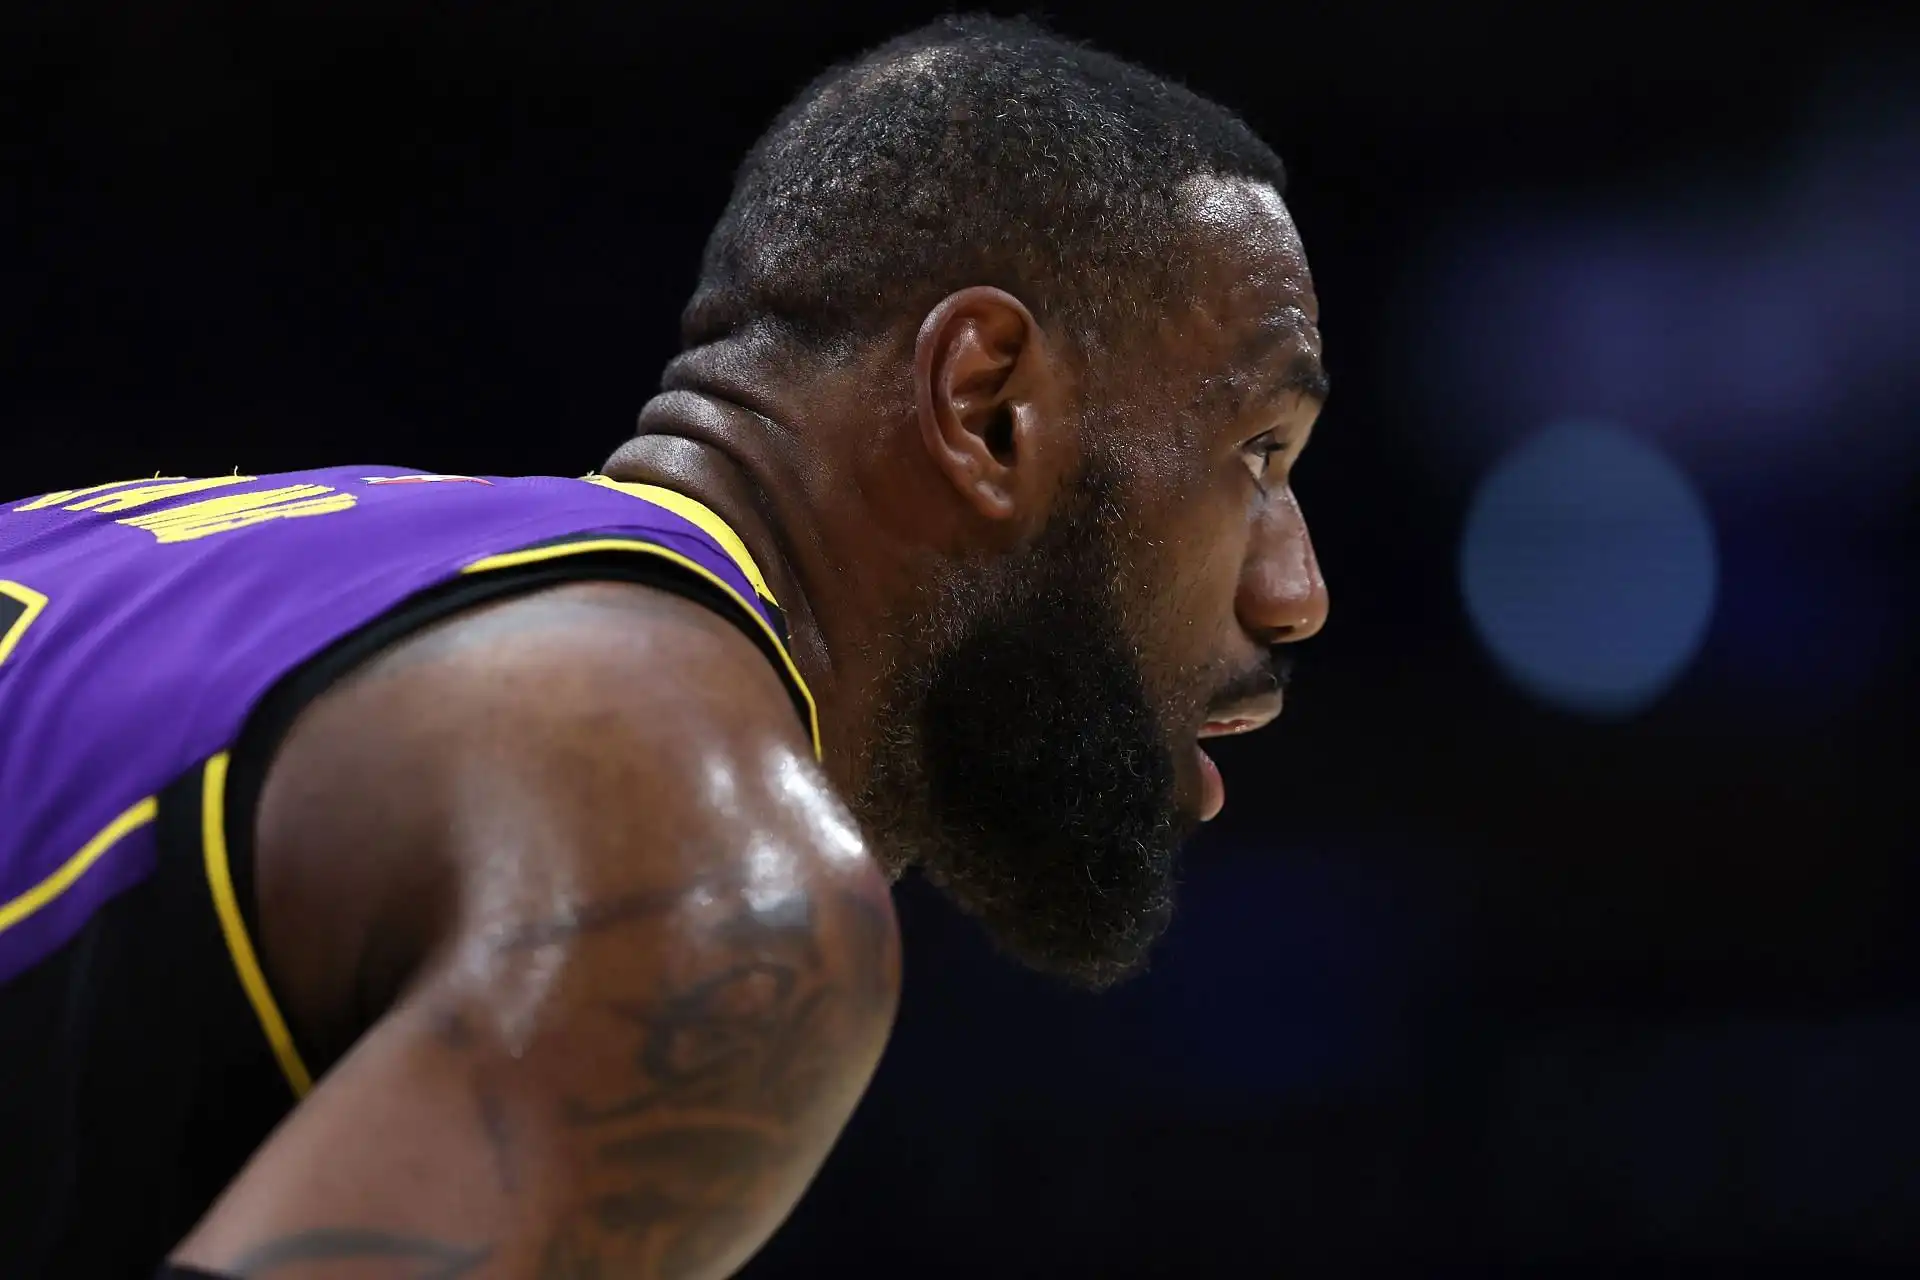 Photos: LeBron James wears $6400 Louis Vuitton outfit before Lakers vs Suns game